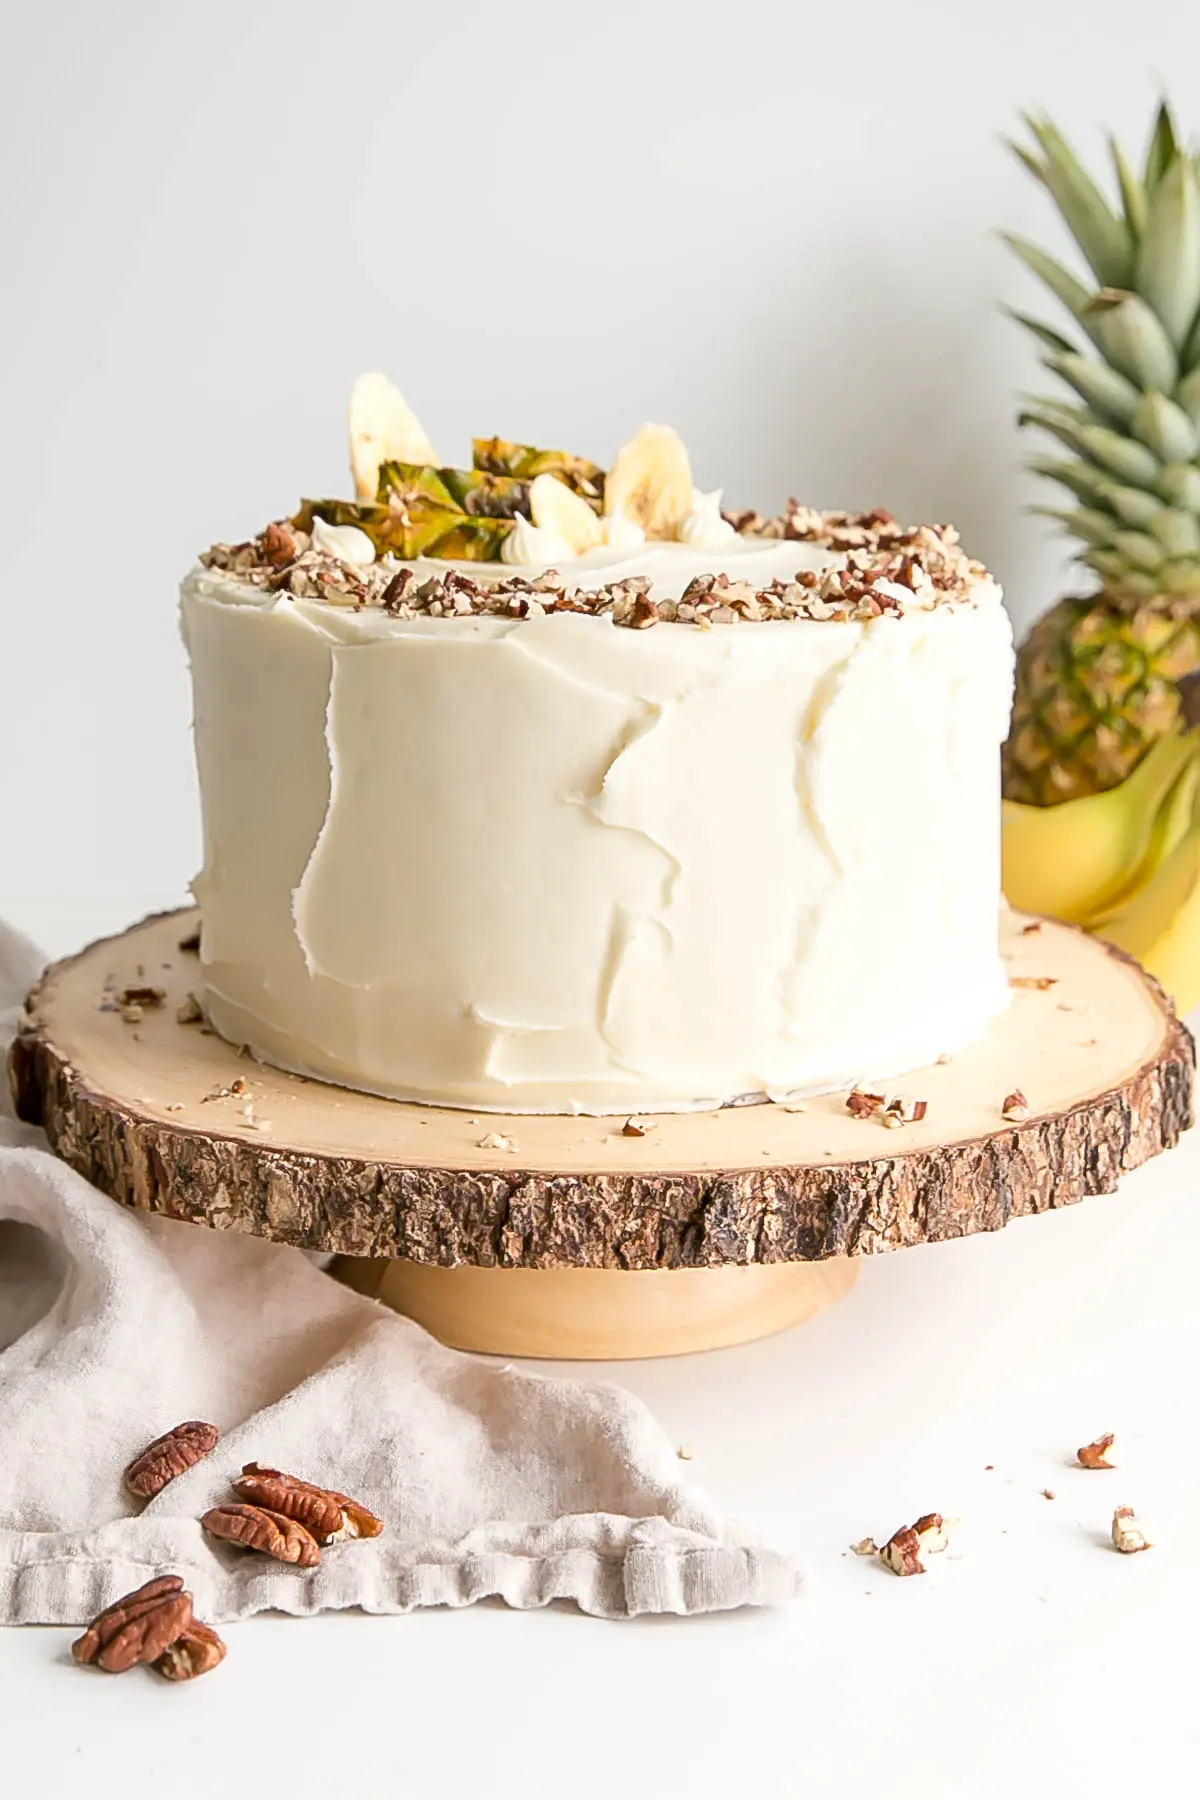 Hummingbird Cake on a rustic wood cake stand with a pineapple and bananas in the background.